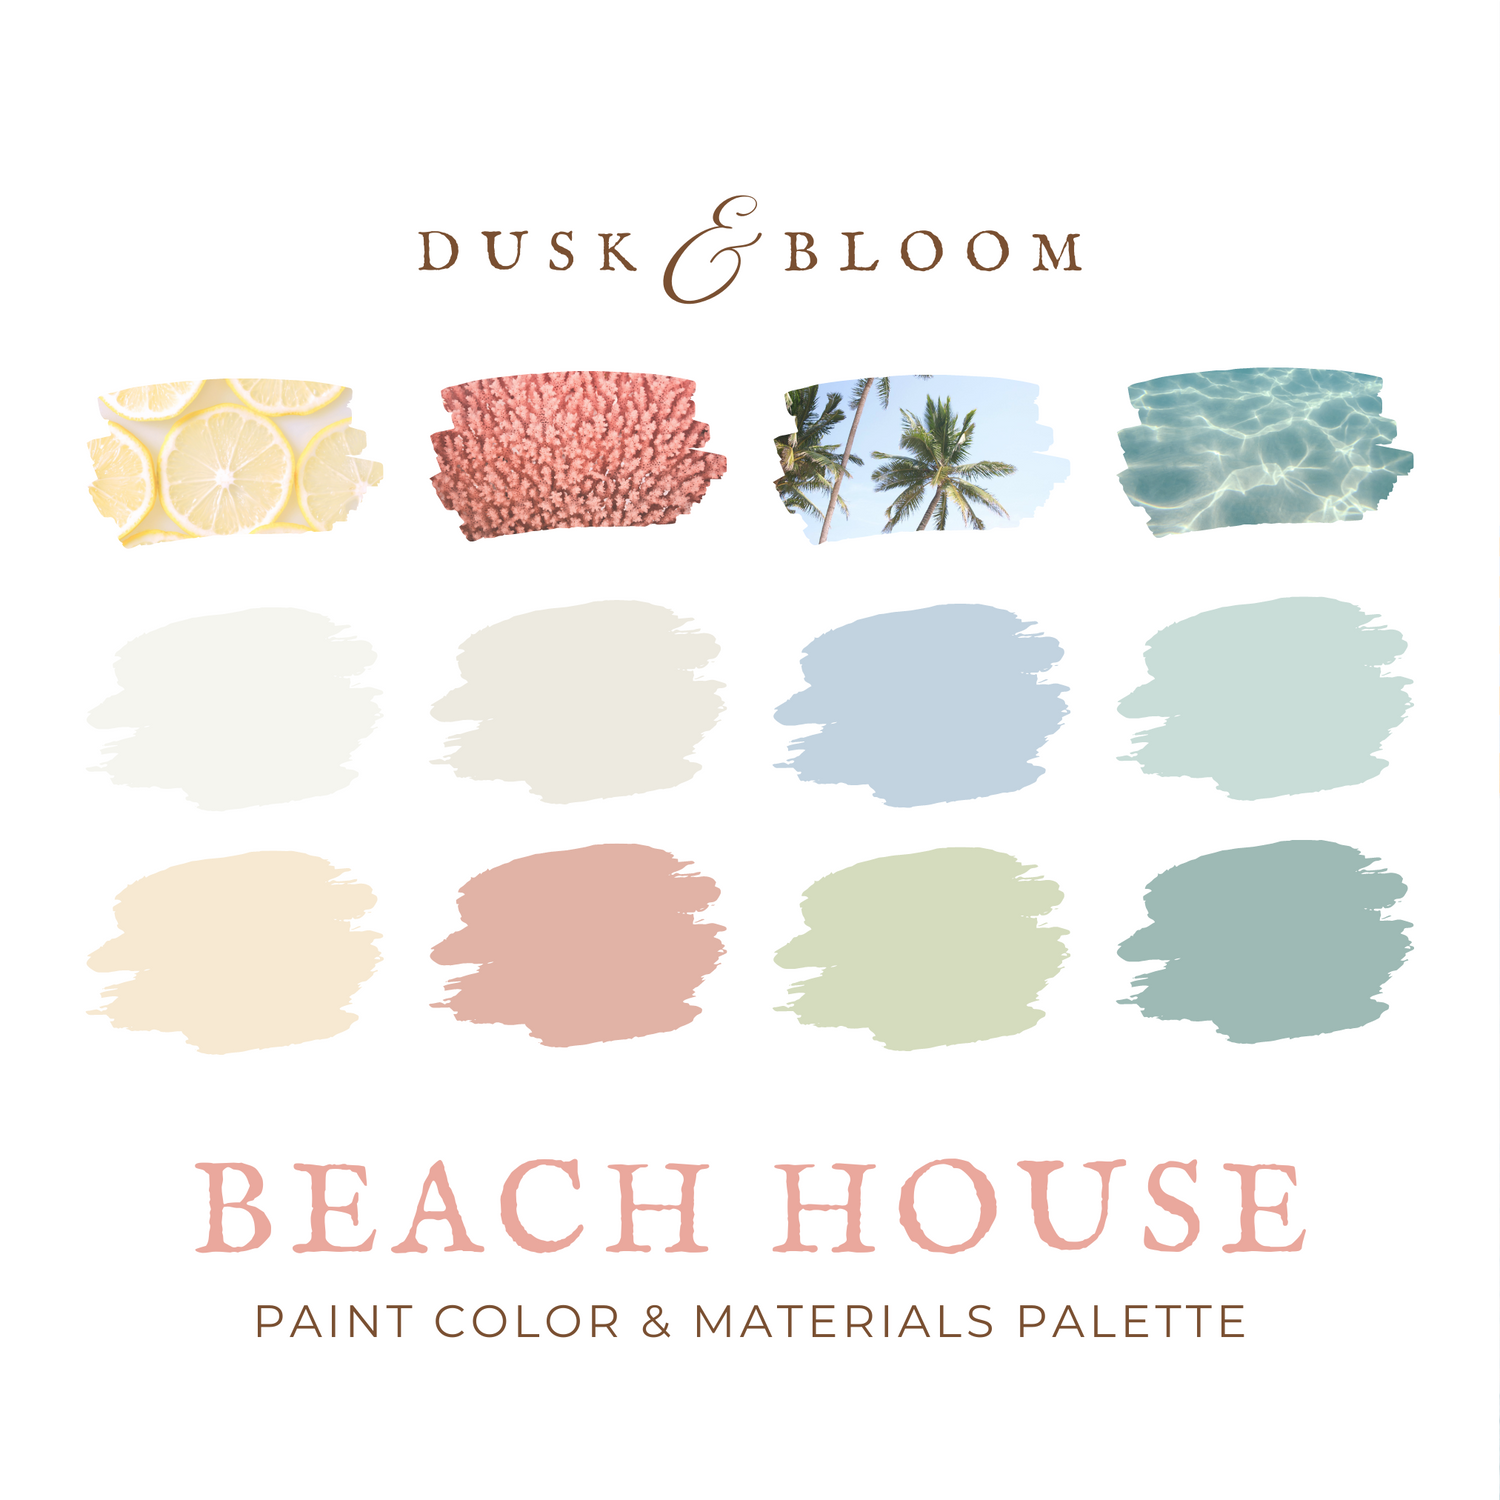 Paint Color Palettes & Materials Guides for the Whole House